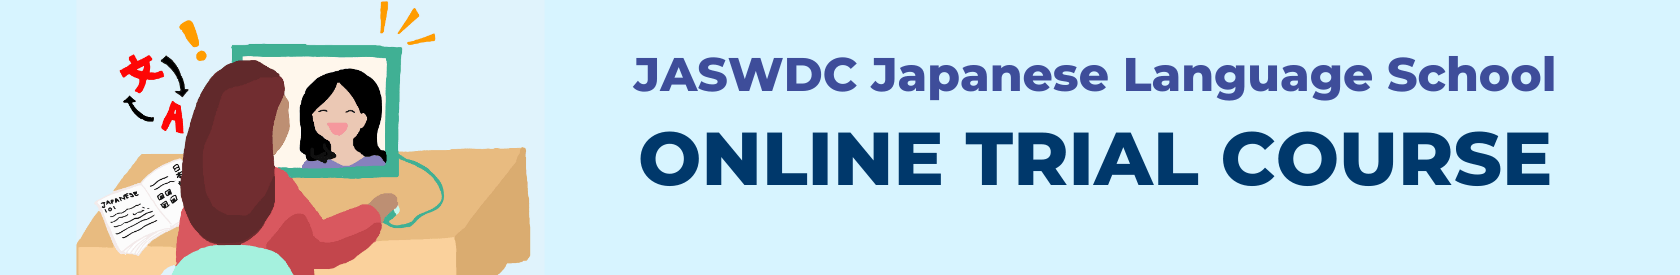 Online Japanese Language Trial Course